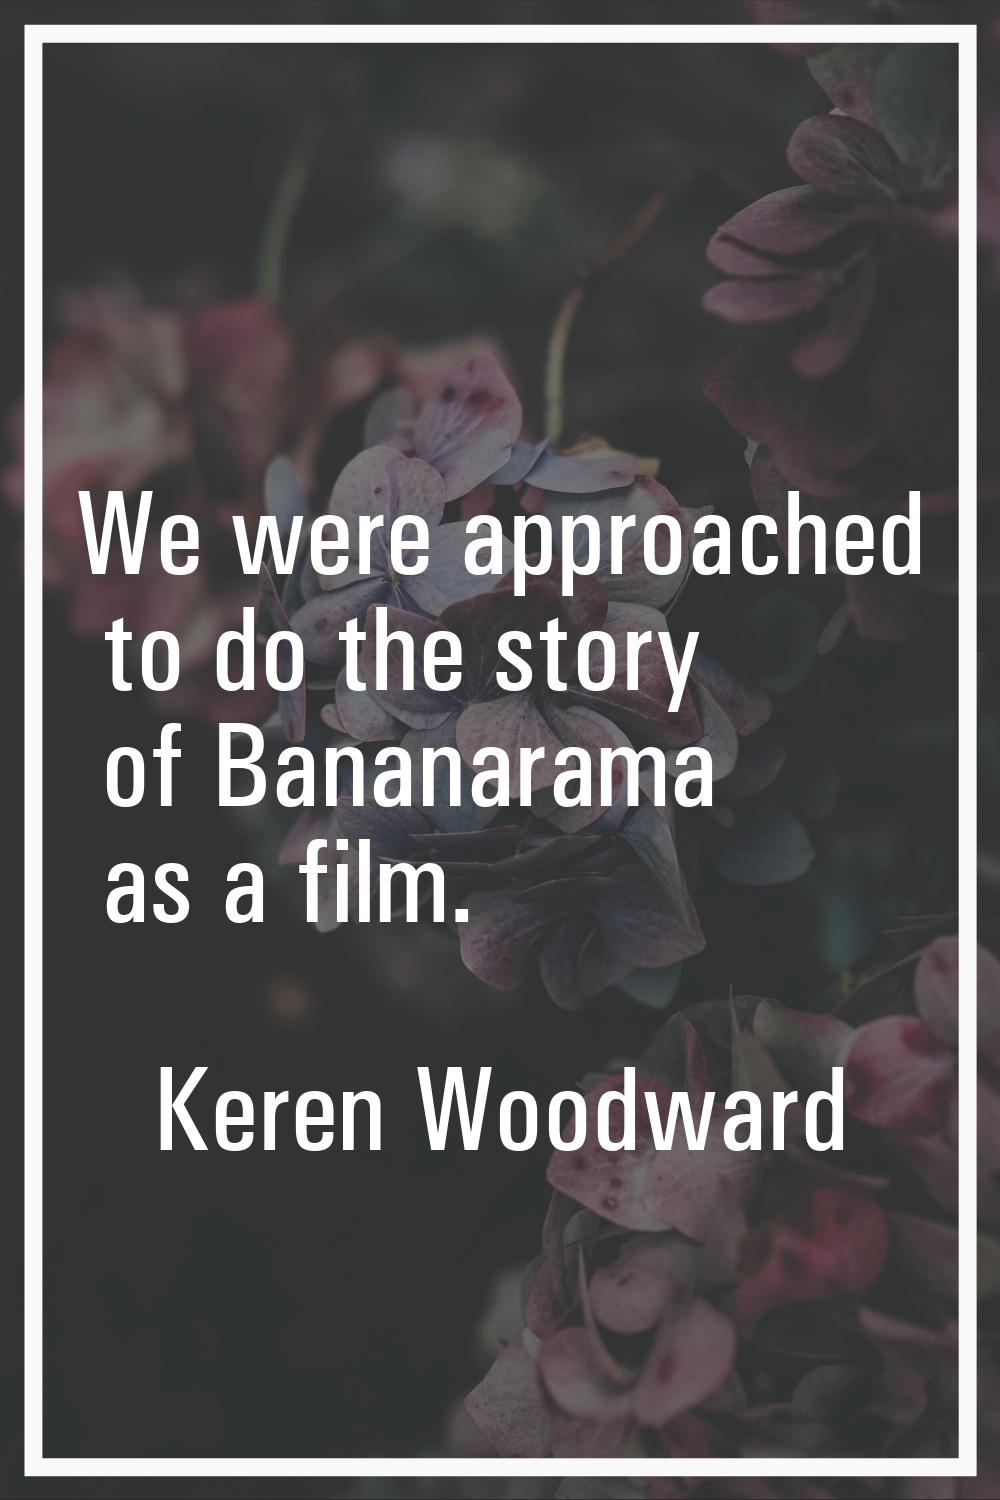 We were approached to do the story of Bananarama as a film.